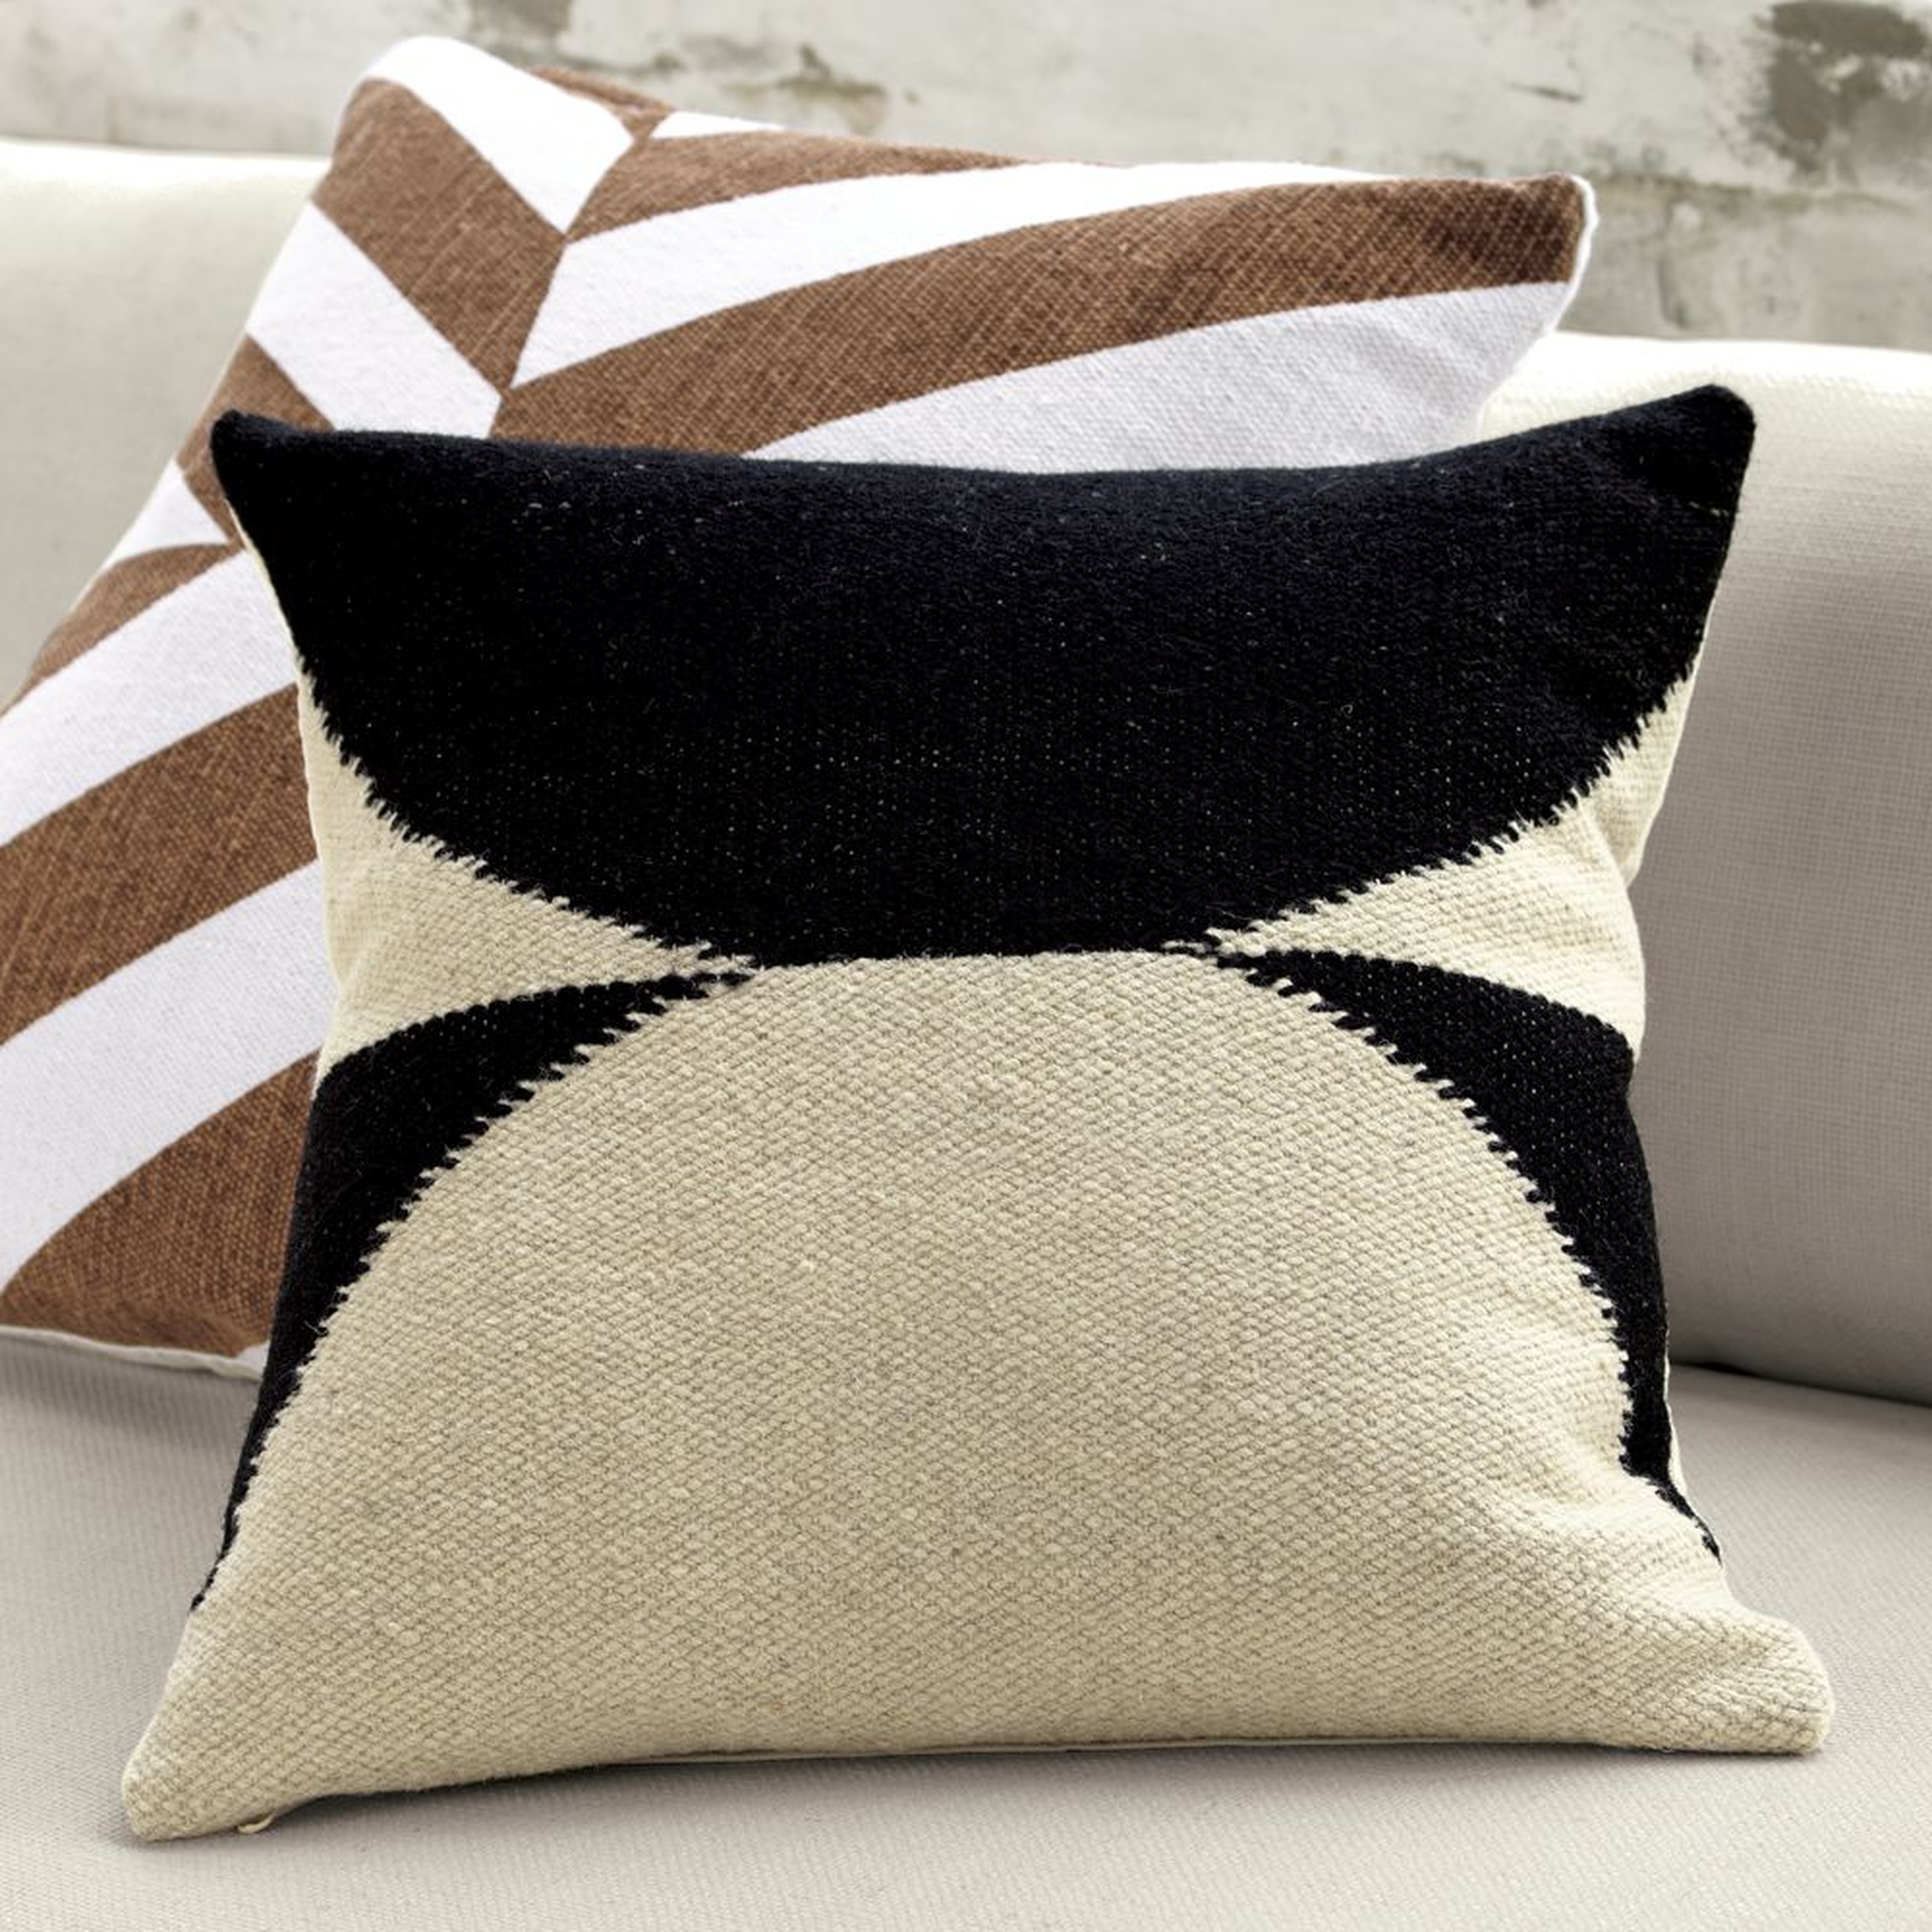 "20"" reflect pillow with down-alternative insert" - CB2